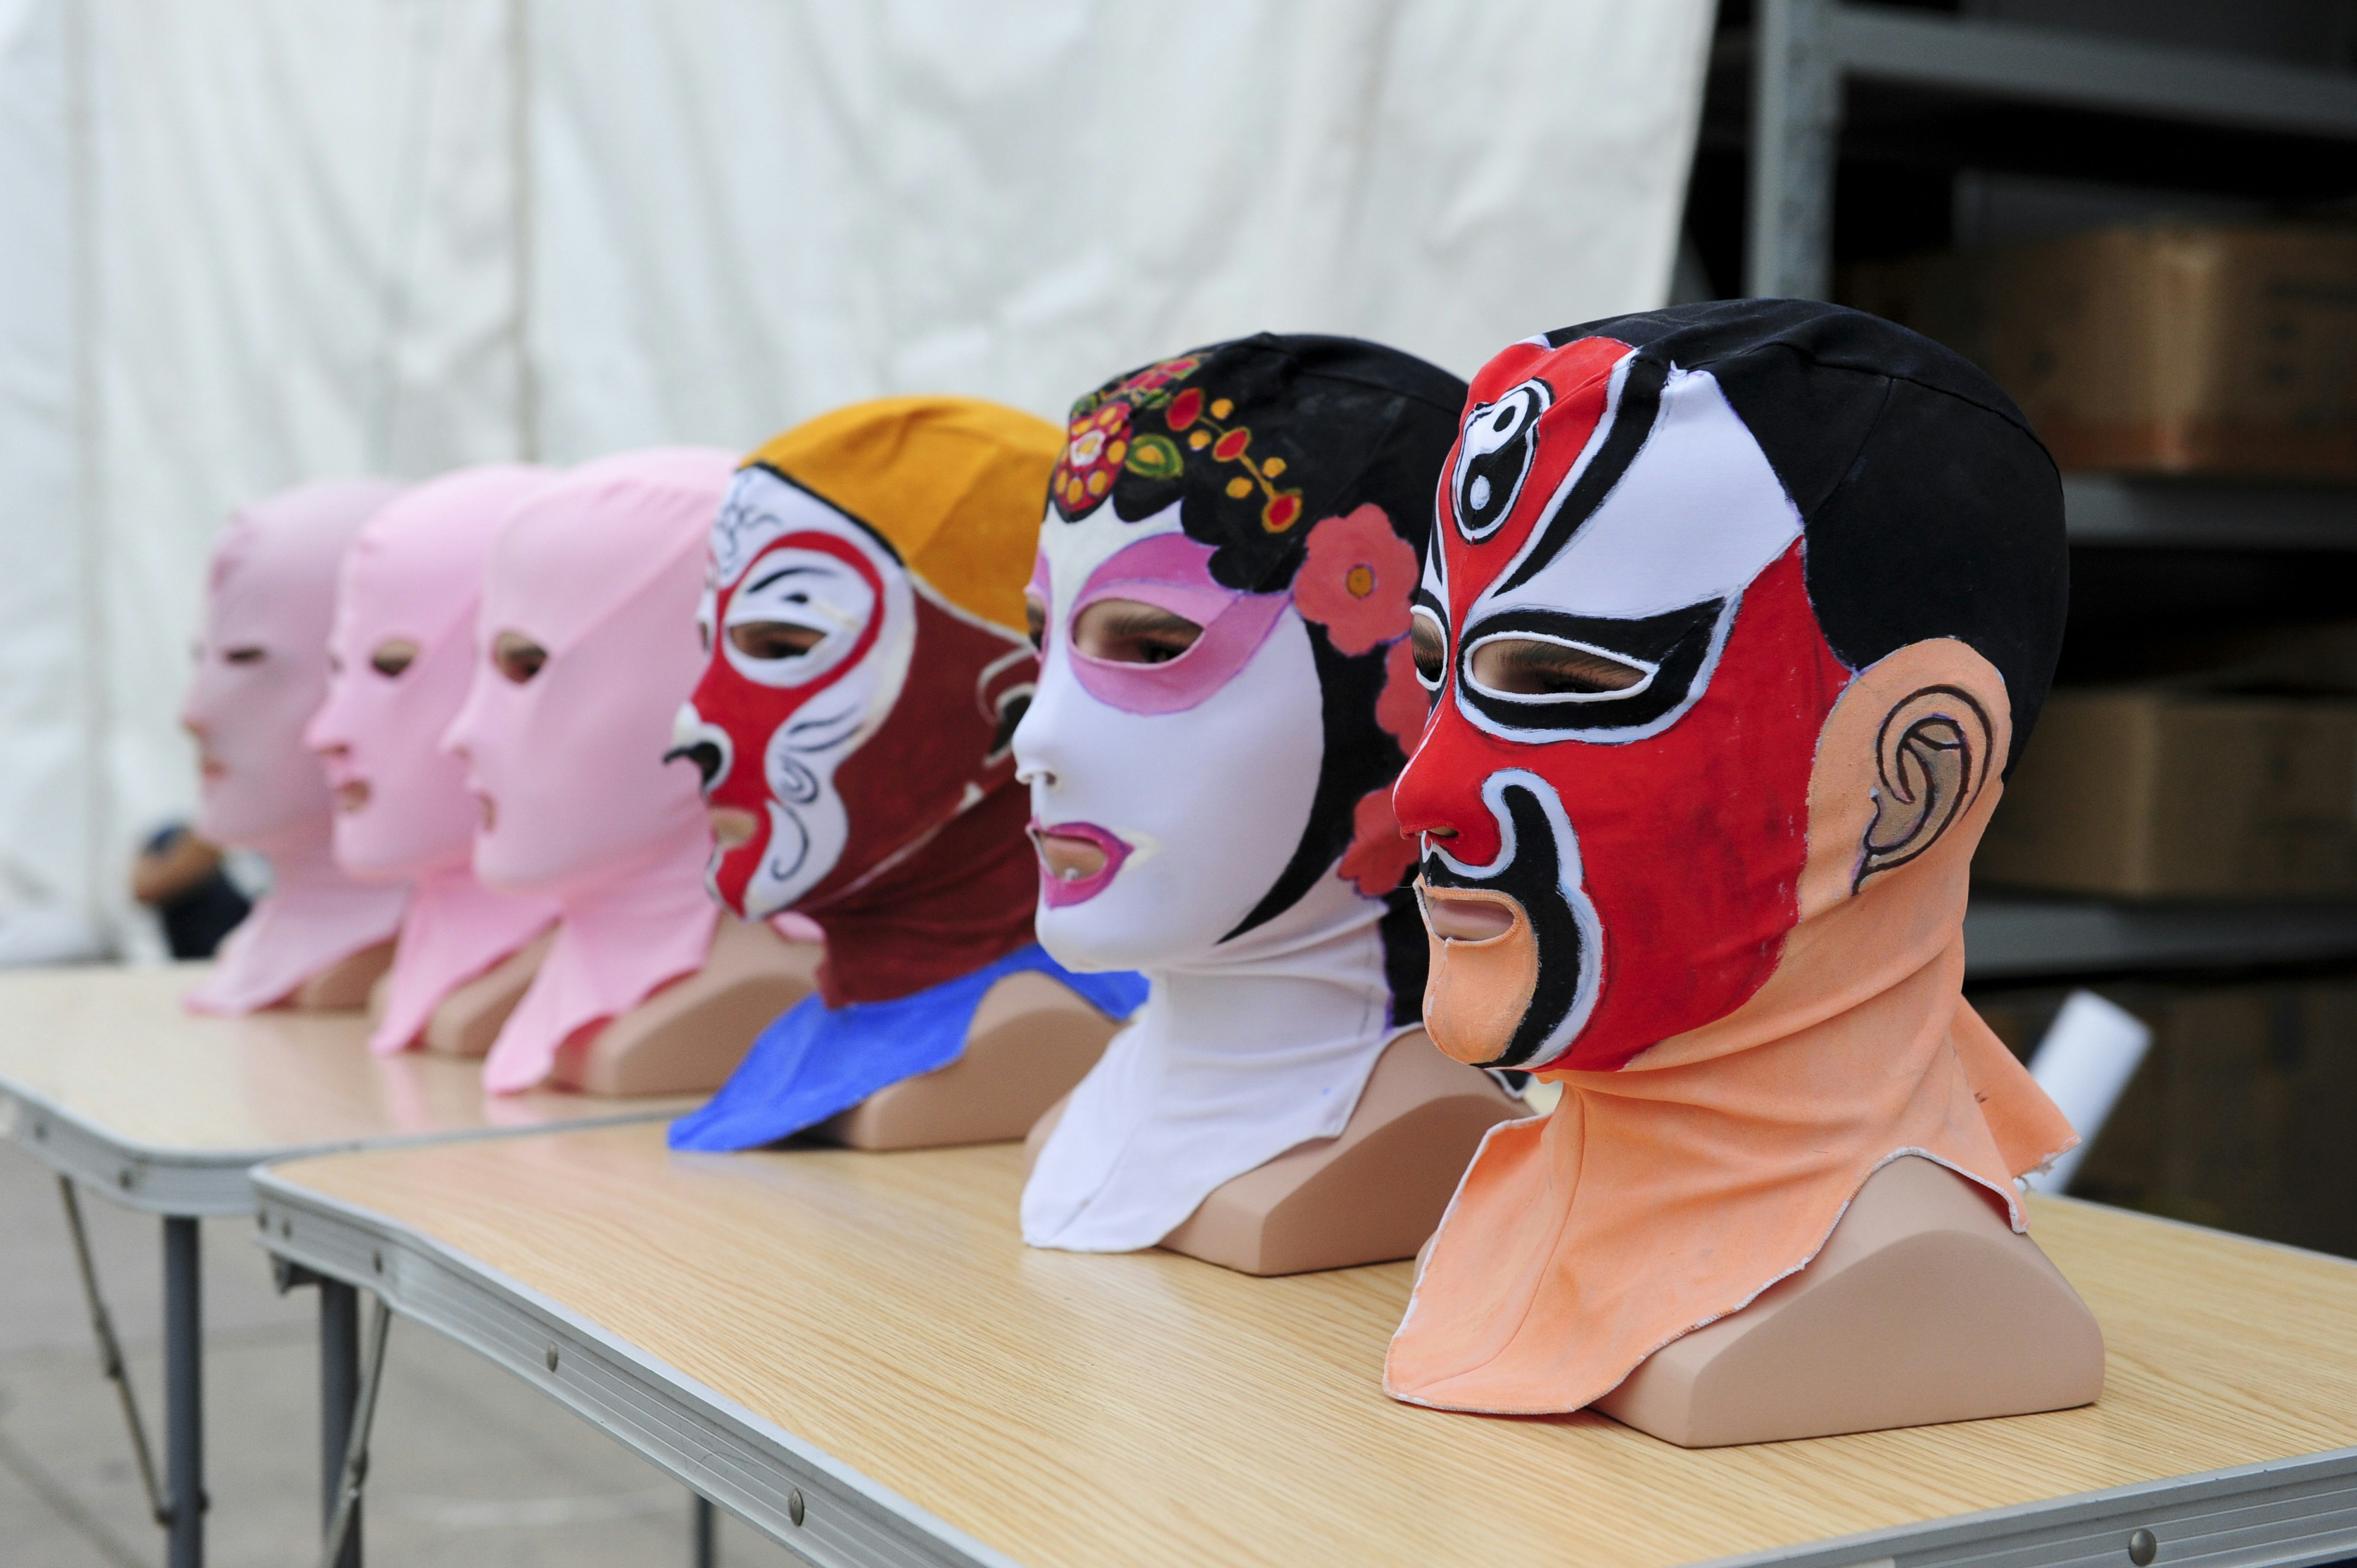 Travel News - The Inventor Launches New Facekini In Qingdao